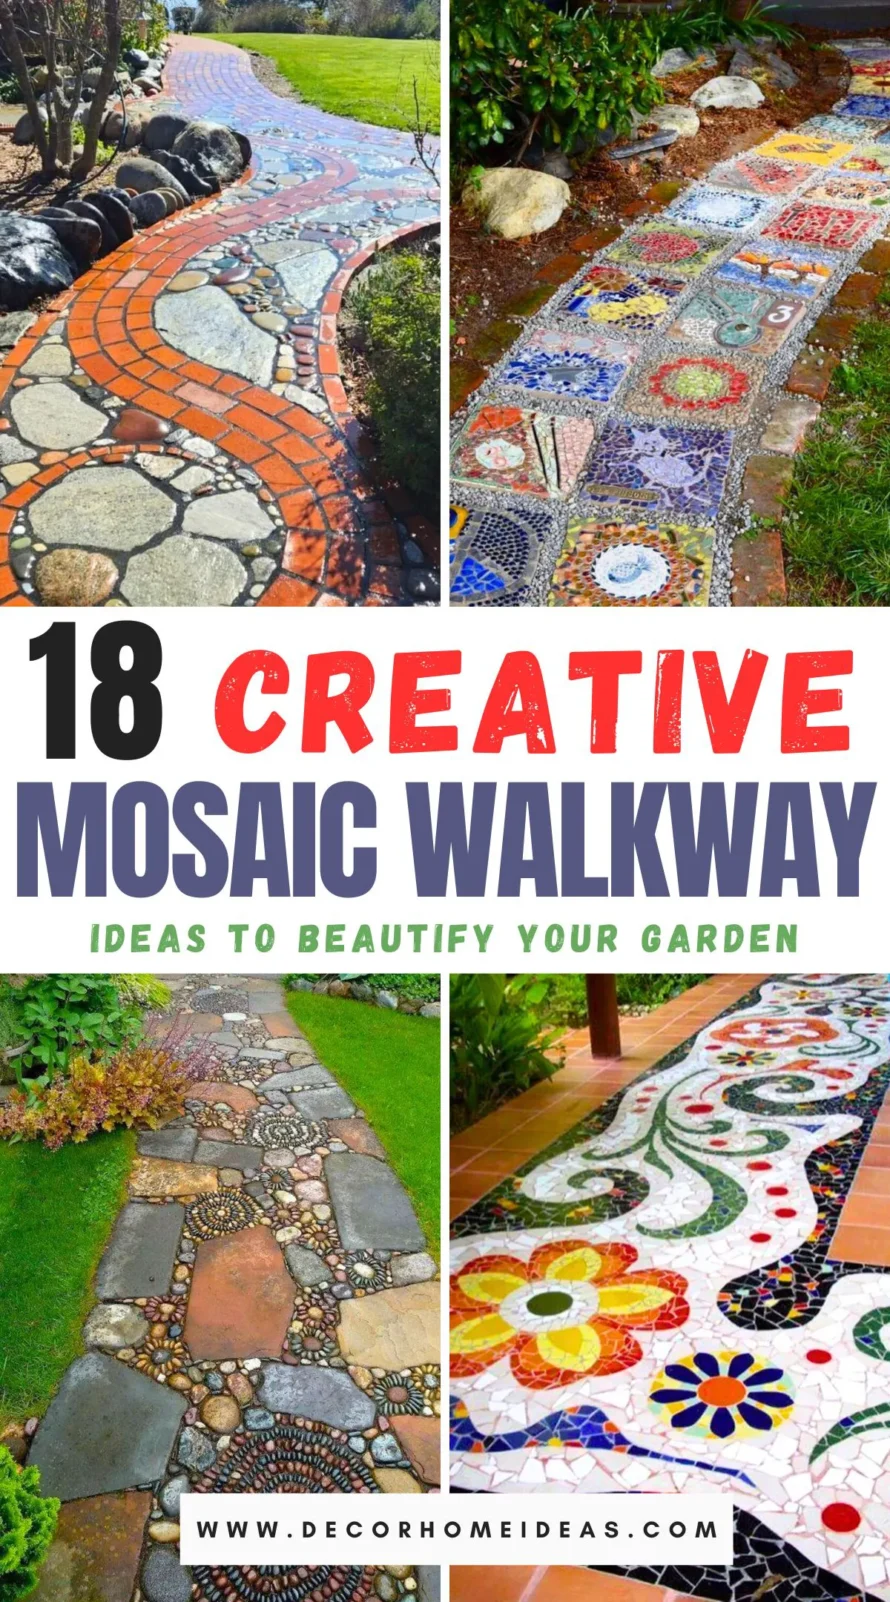 Discover 18 creative mosaic walkway ideas to transform your garden into a vibrant, artistic haven. From colorful pebble patterns to intricate tile designs, these unique paths will add charm and personality to any outdoor space. Unleash your creativity and explore the possibilities to enhance your garden's beauty with stunning mosaic walkways.